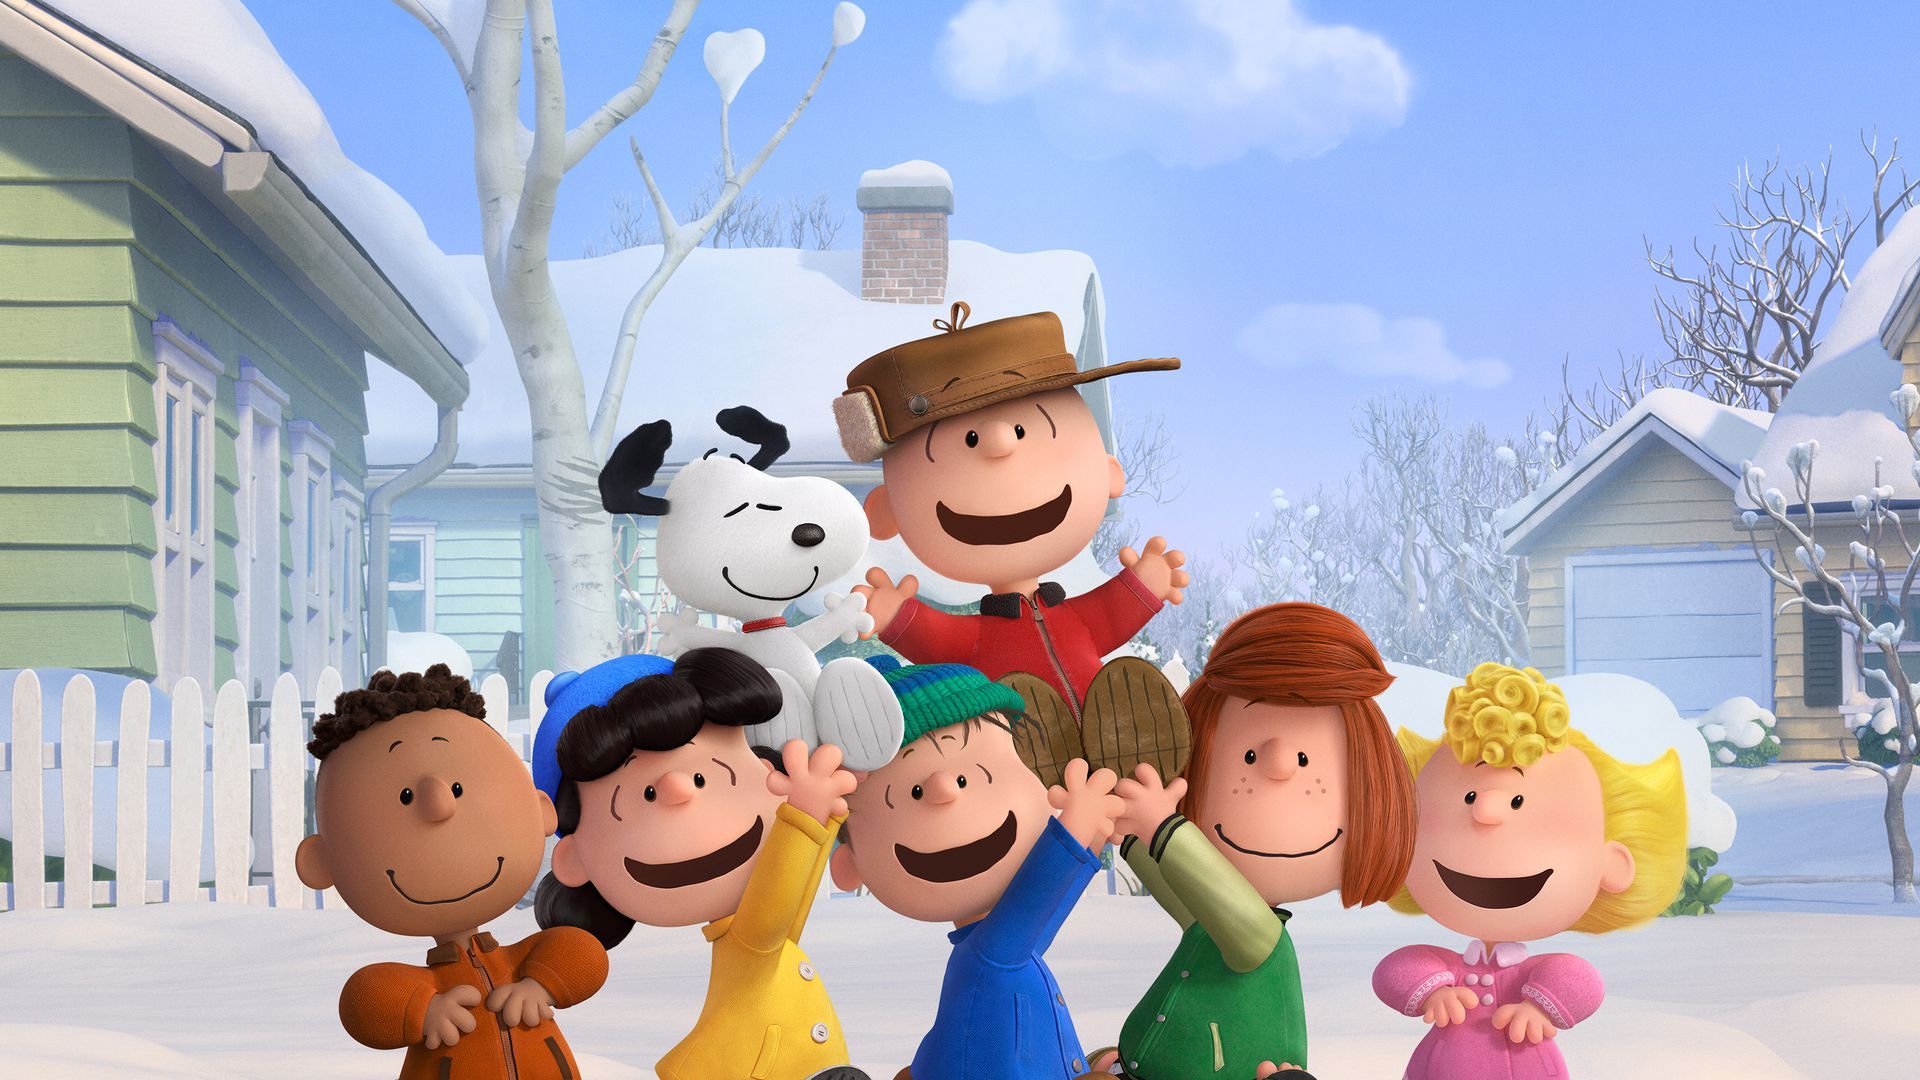 THE PEANUTS MOVIE Now on Digital HD Coming to Blu ray & DVD